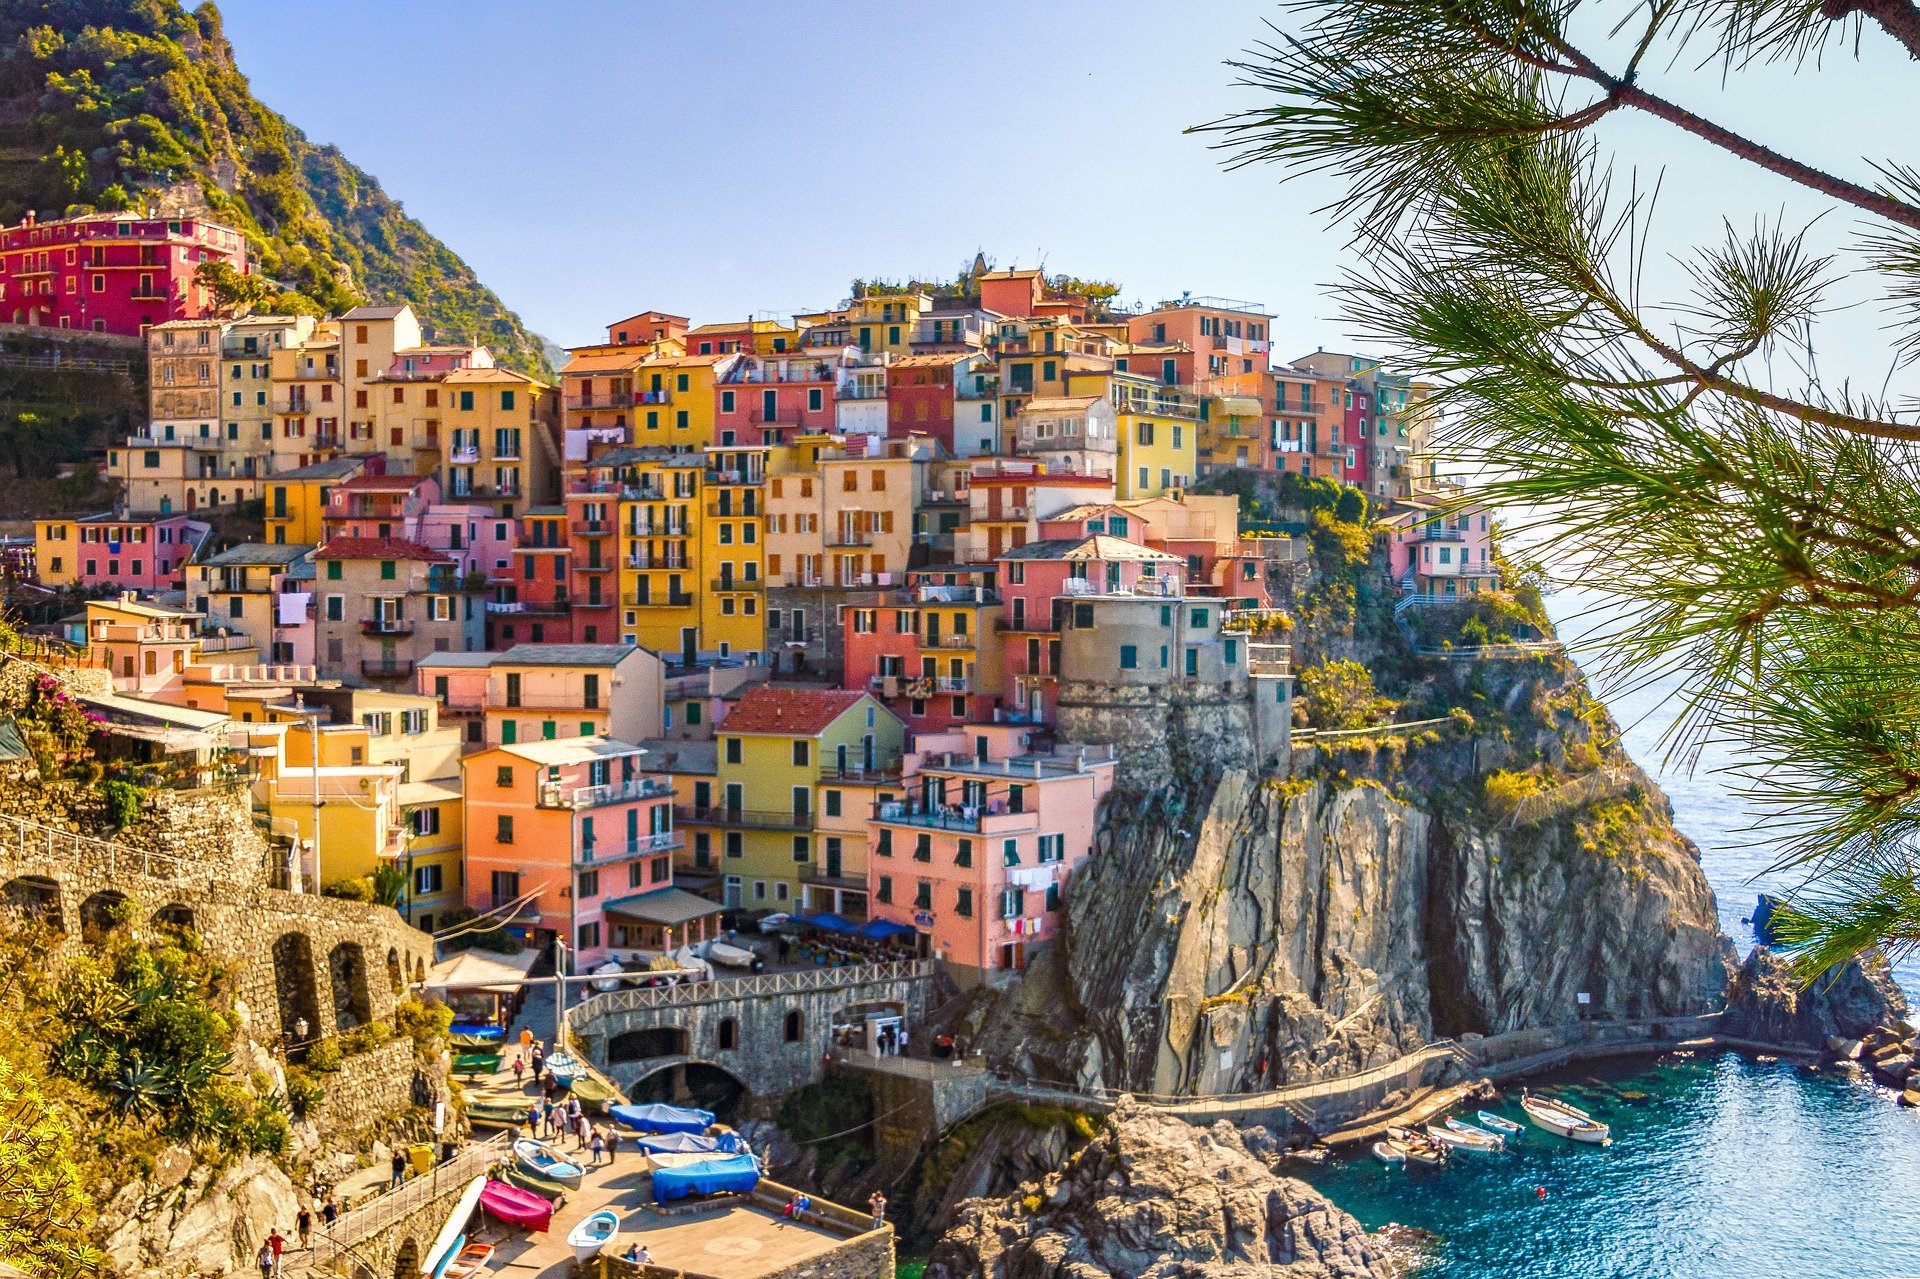 Colorful homes along the hillside overlooking a cove in Italy